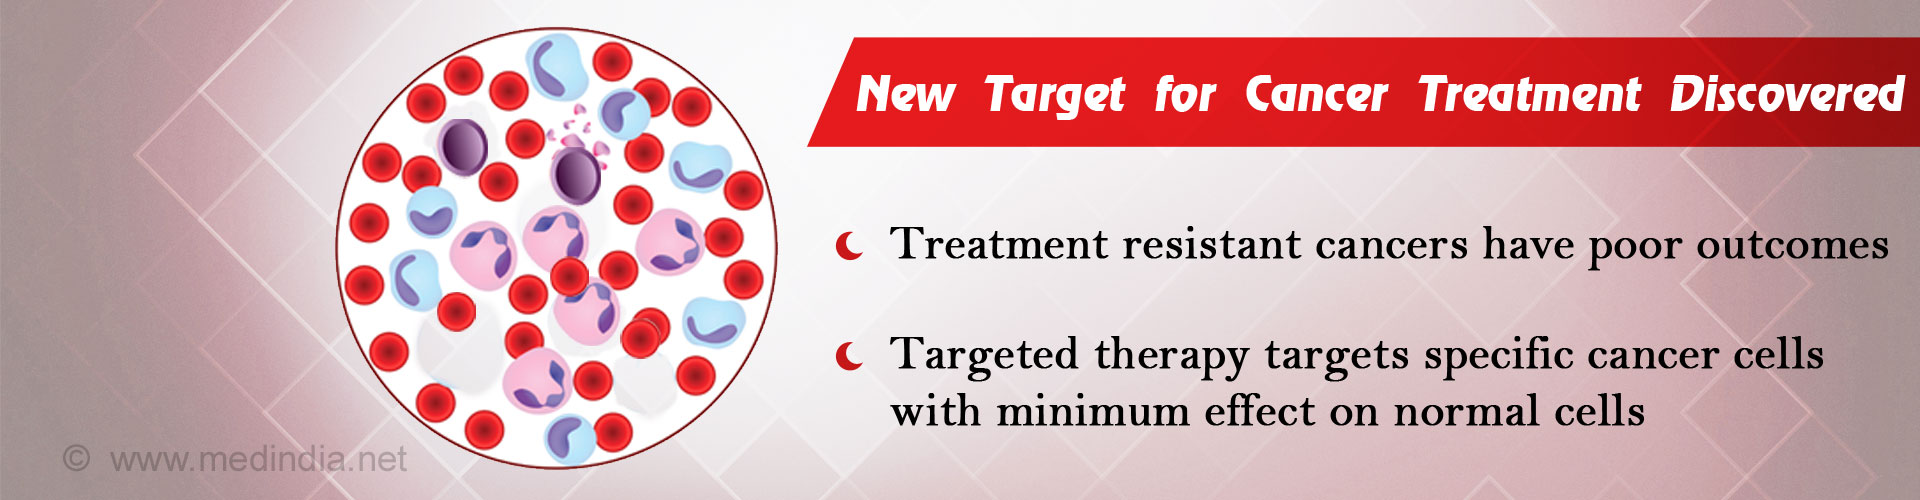 New Target for Cancer Treatment Discovered
- Treatment reistant cancers have poor outcomes
- Targeted therapy targets specific cancer cells with minimum effort on normal cells